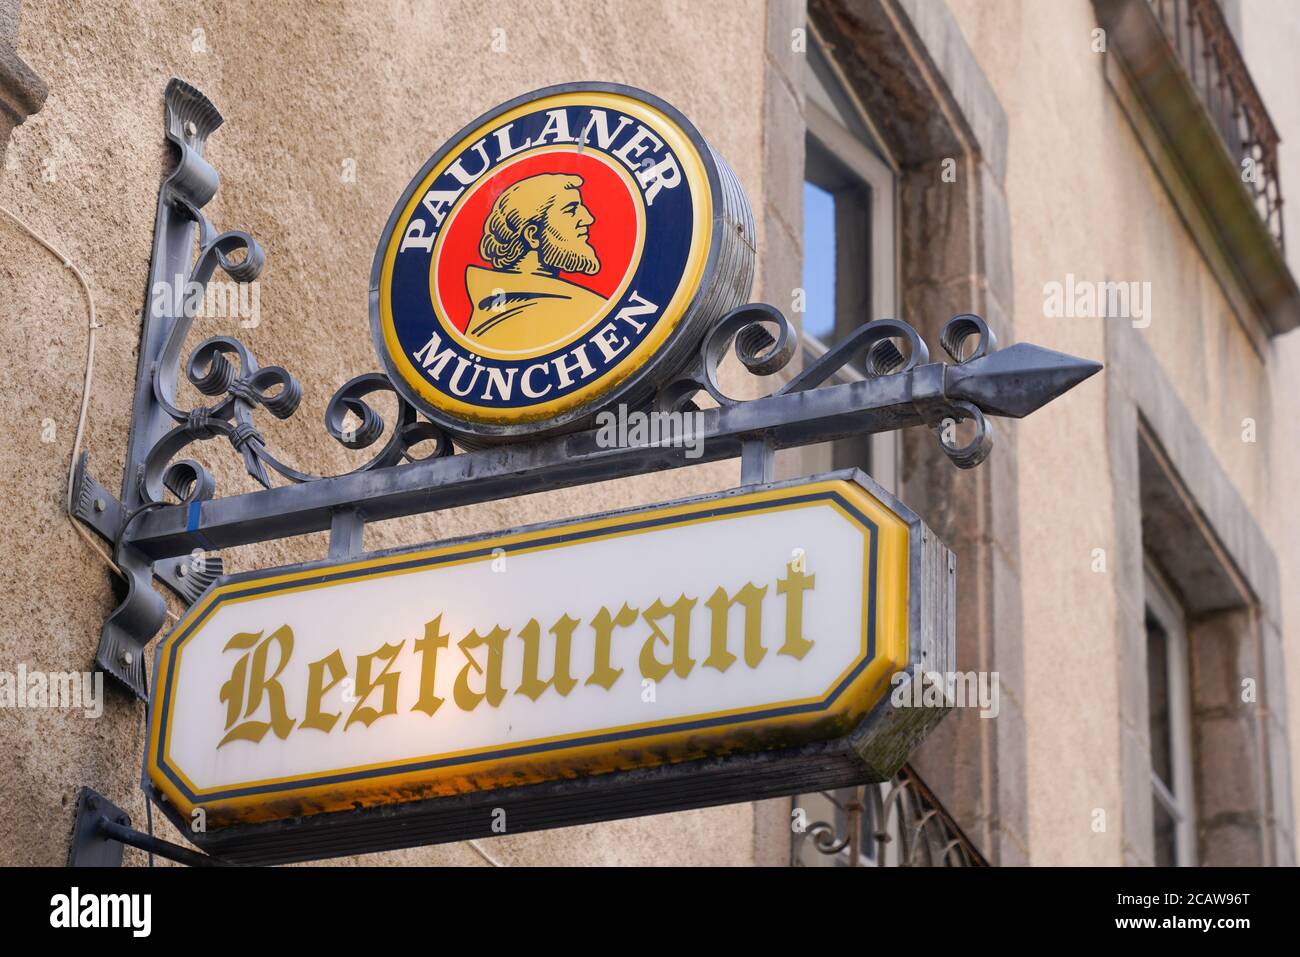 Bordeaux , Aquitaine / France - 08 04 2020 : paulaner logo and restaurant text sign of beer on street bar wall in shop pub coffee restaurant Stock Photo